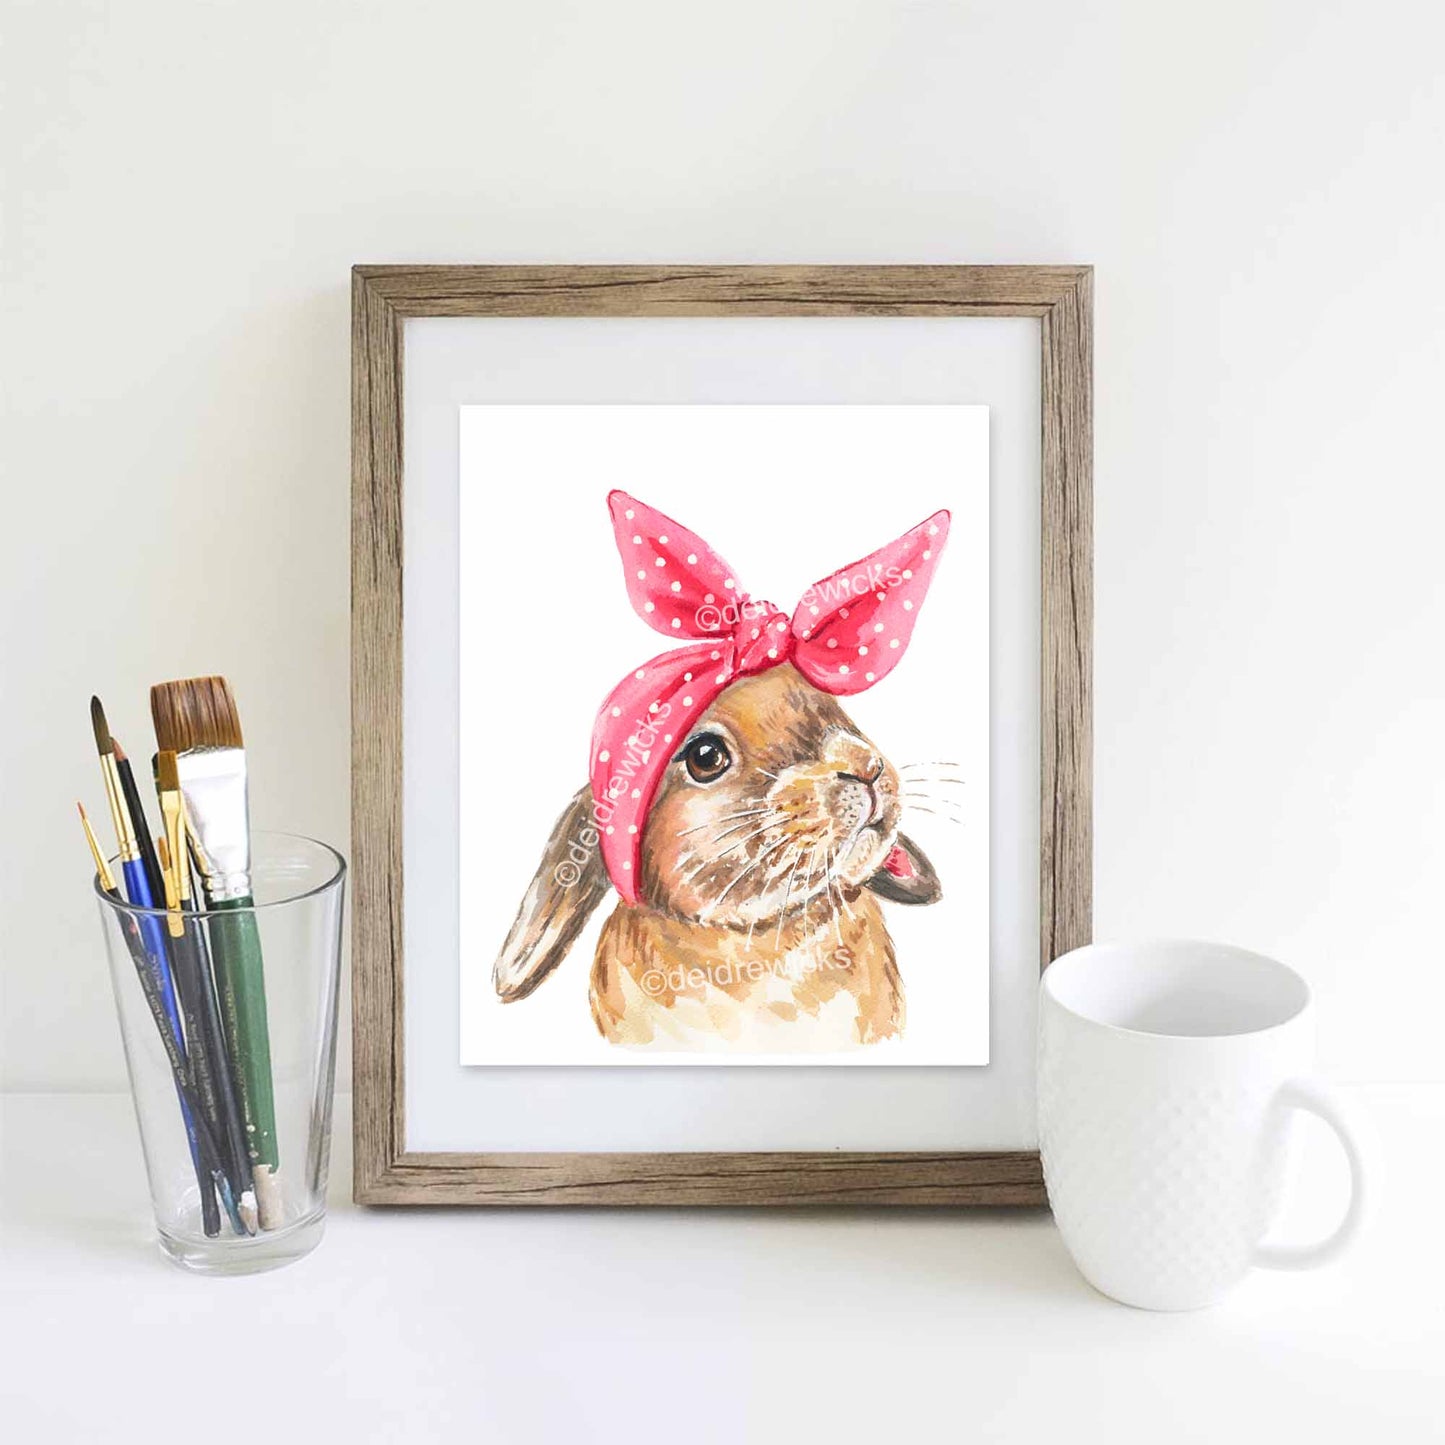 Example of a framed bunny rabbit watercolour painting by Deidre Wicks